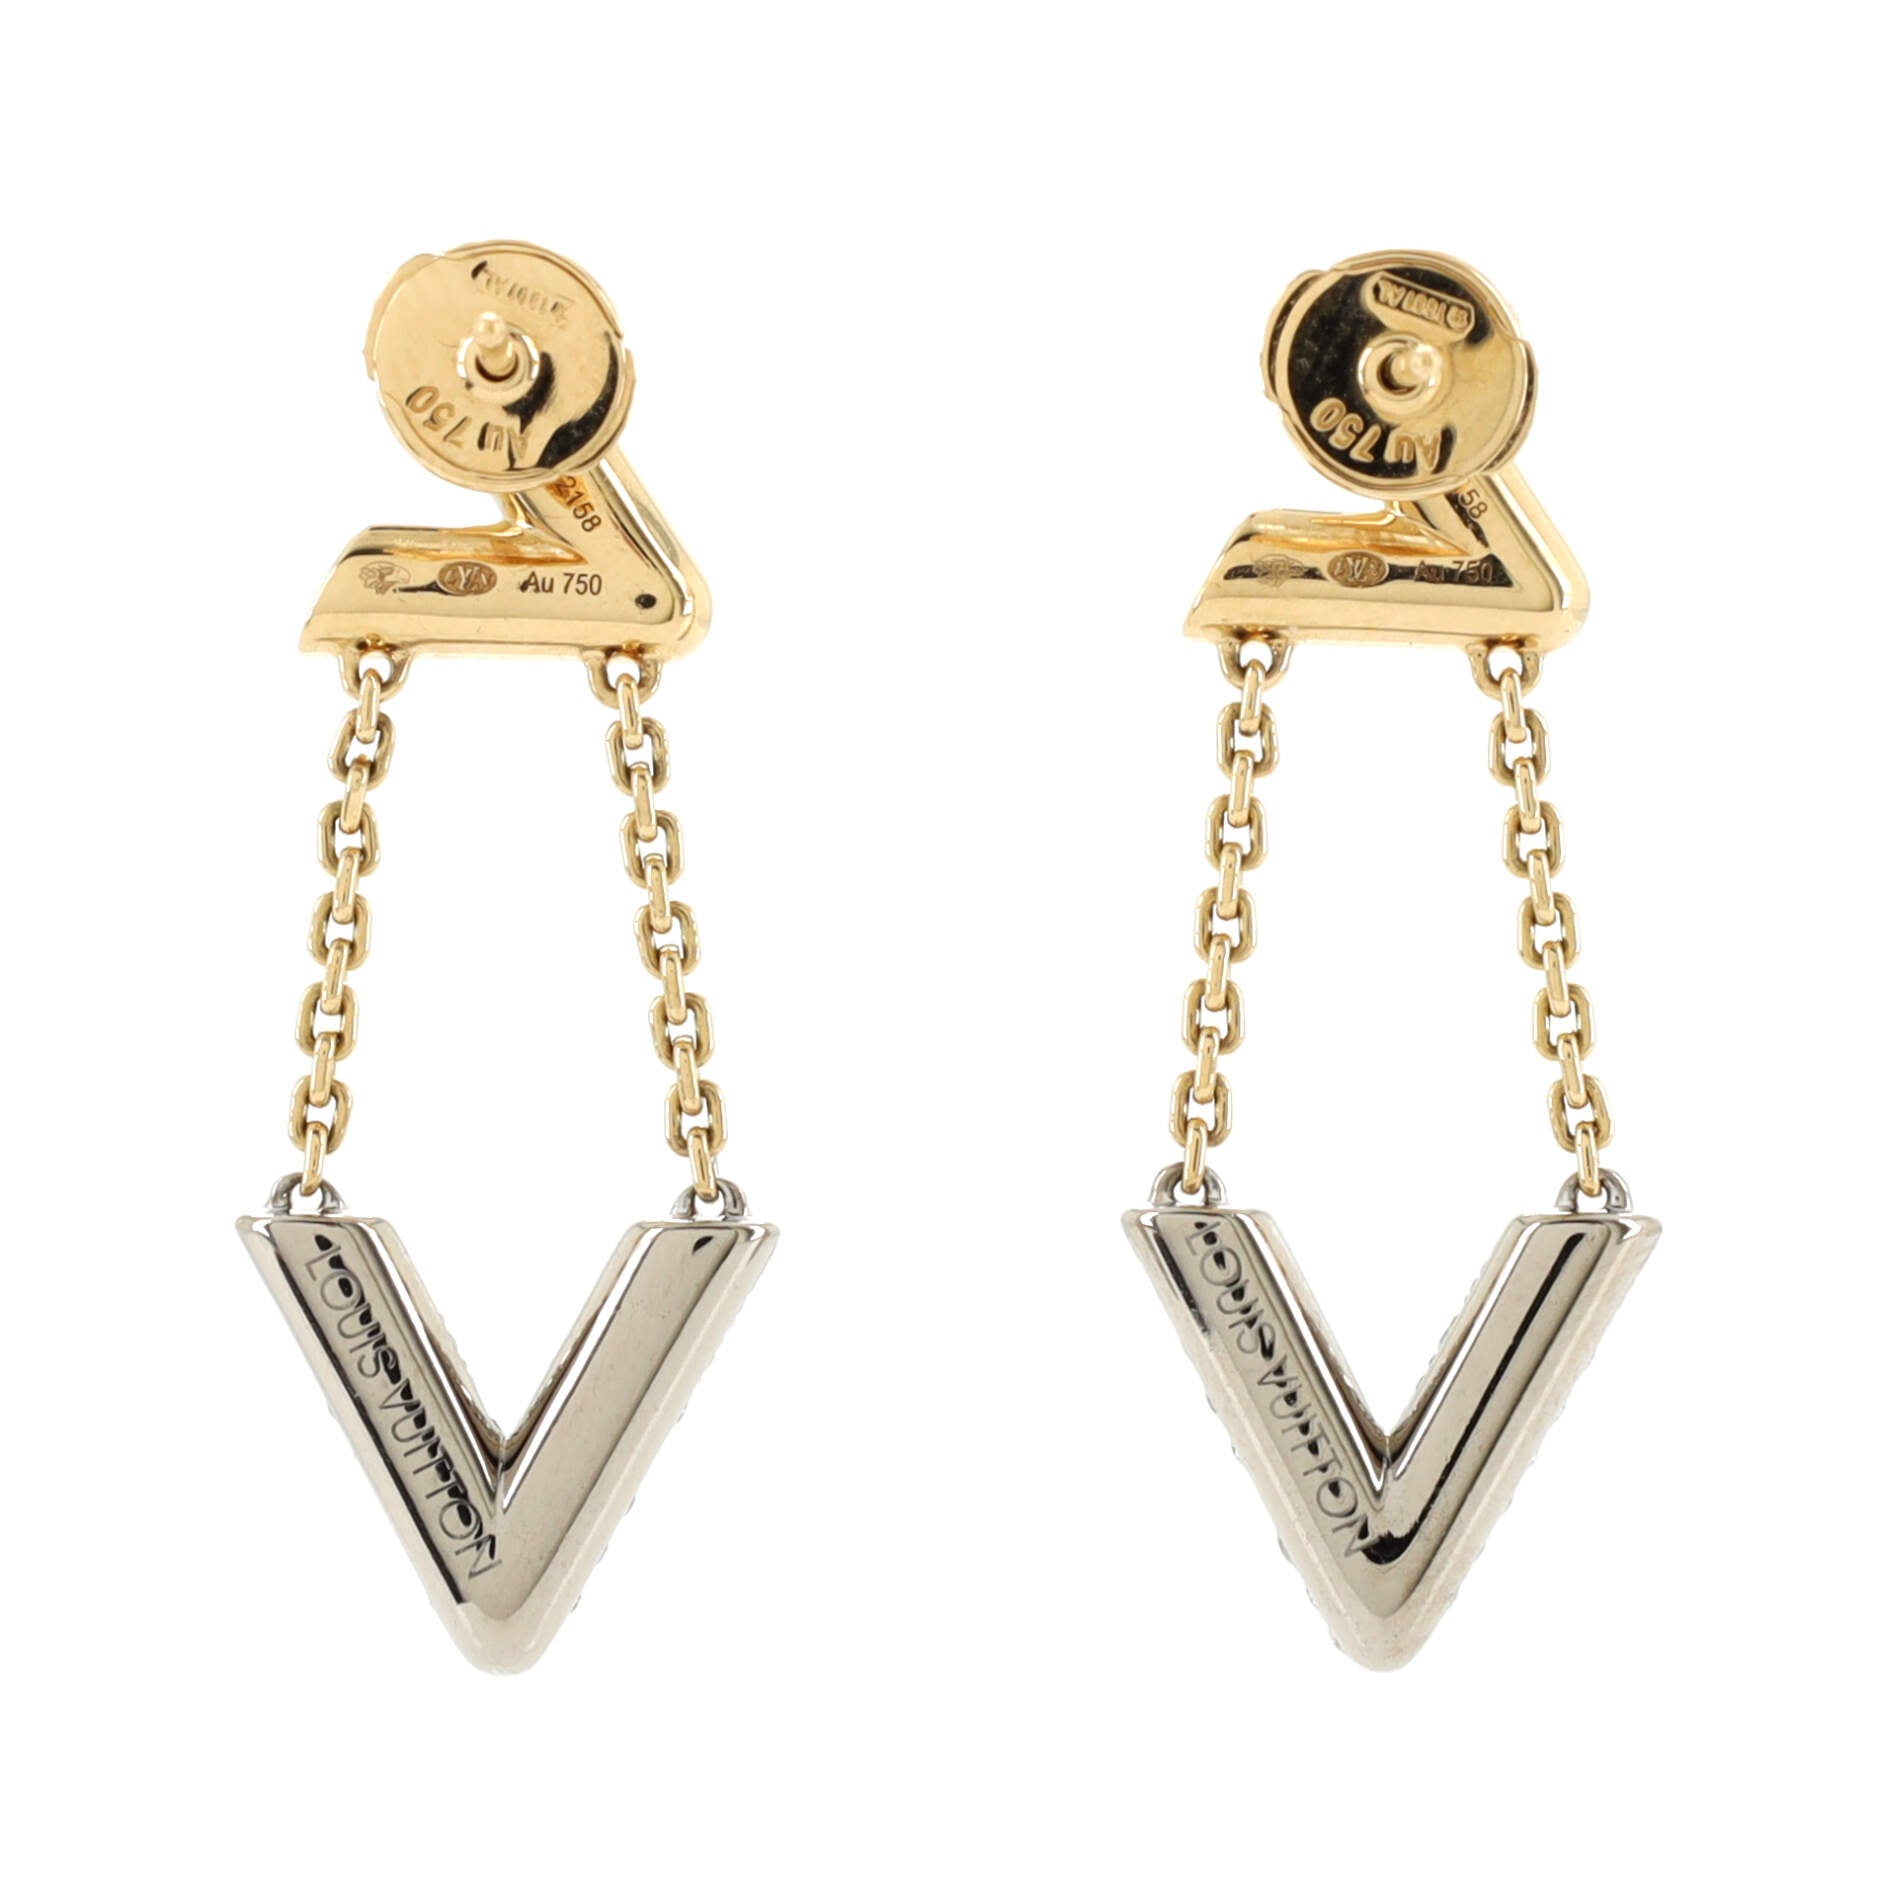 Louis Vuitton Yellow Gold And Diamond Lv Volt Stud Earring